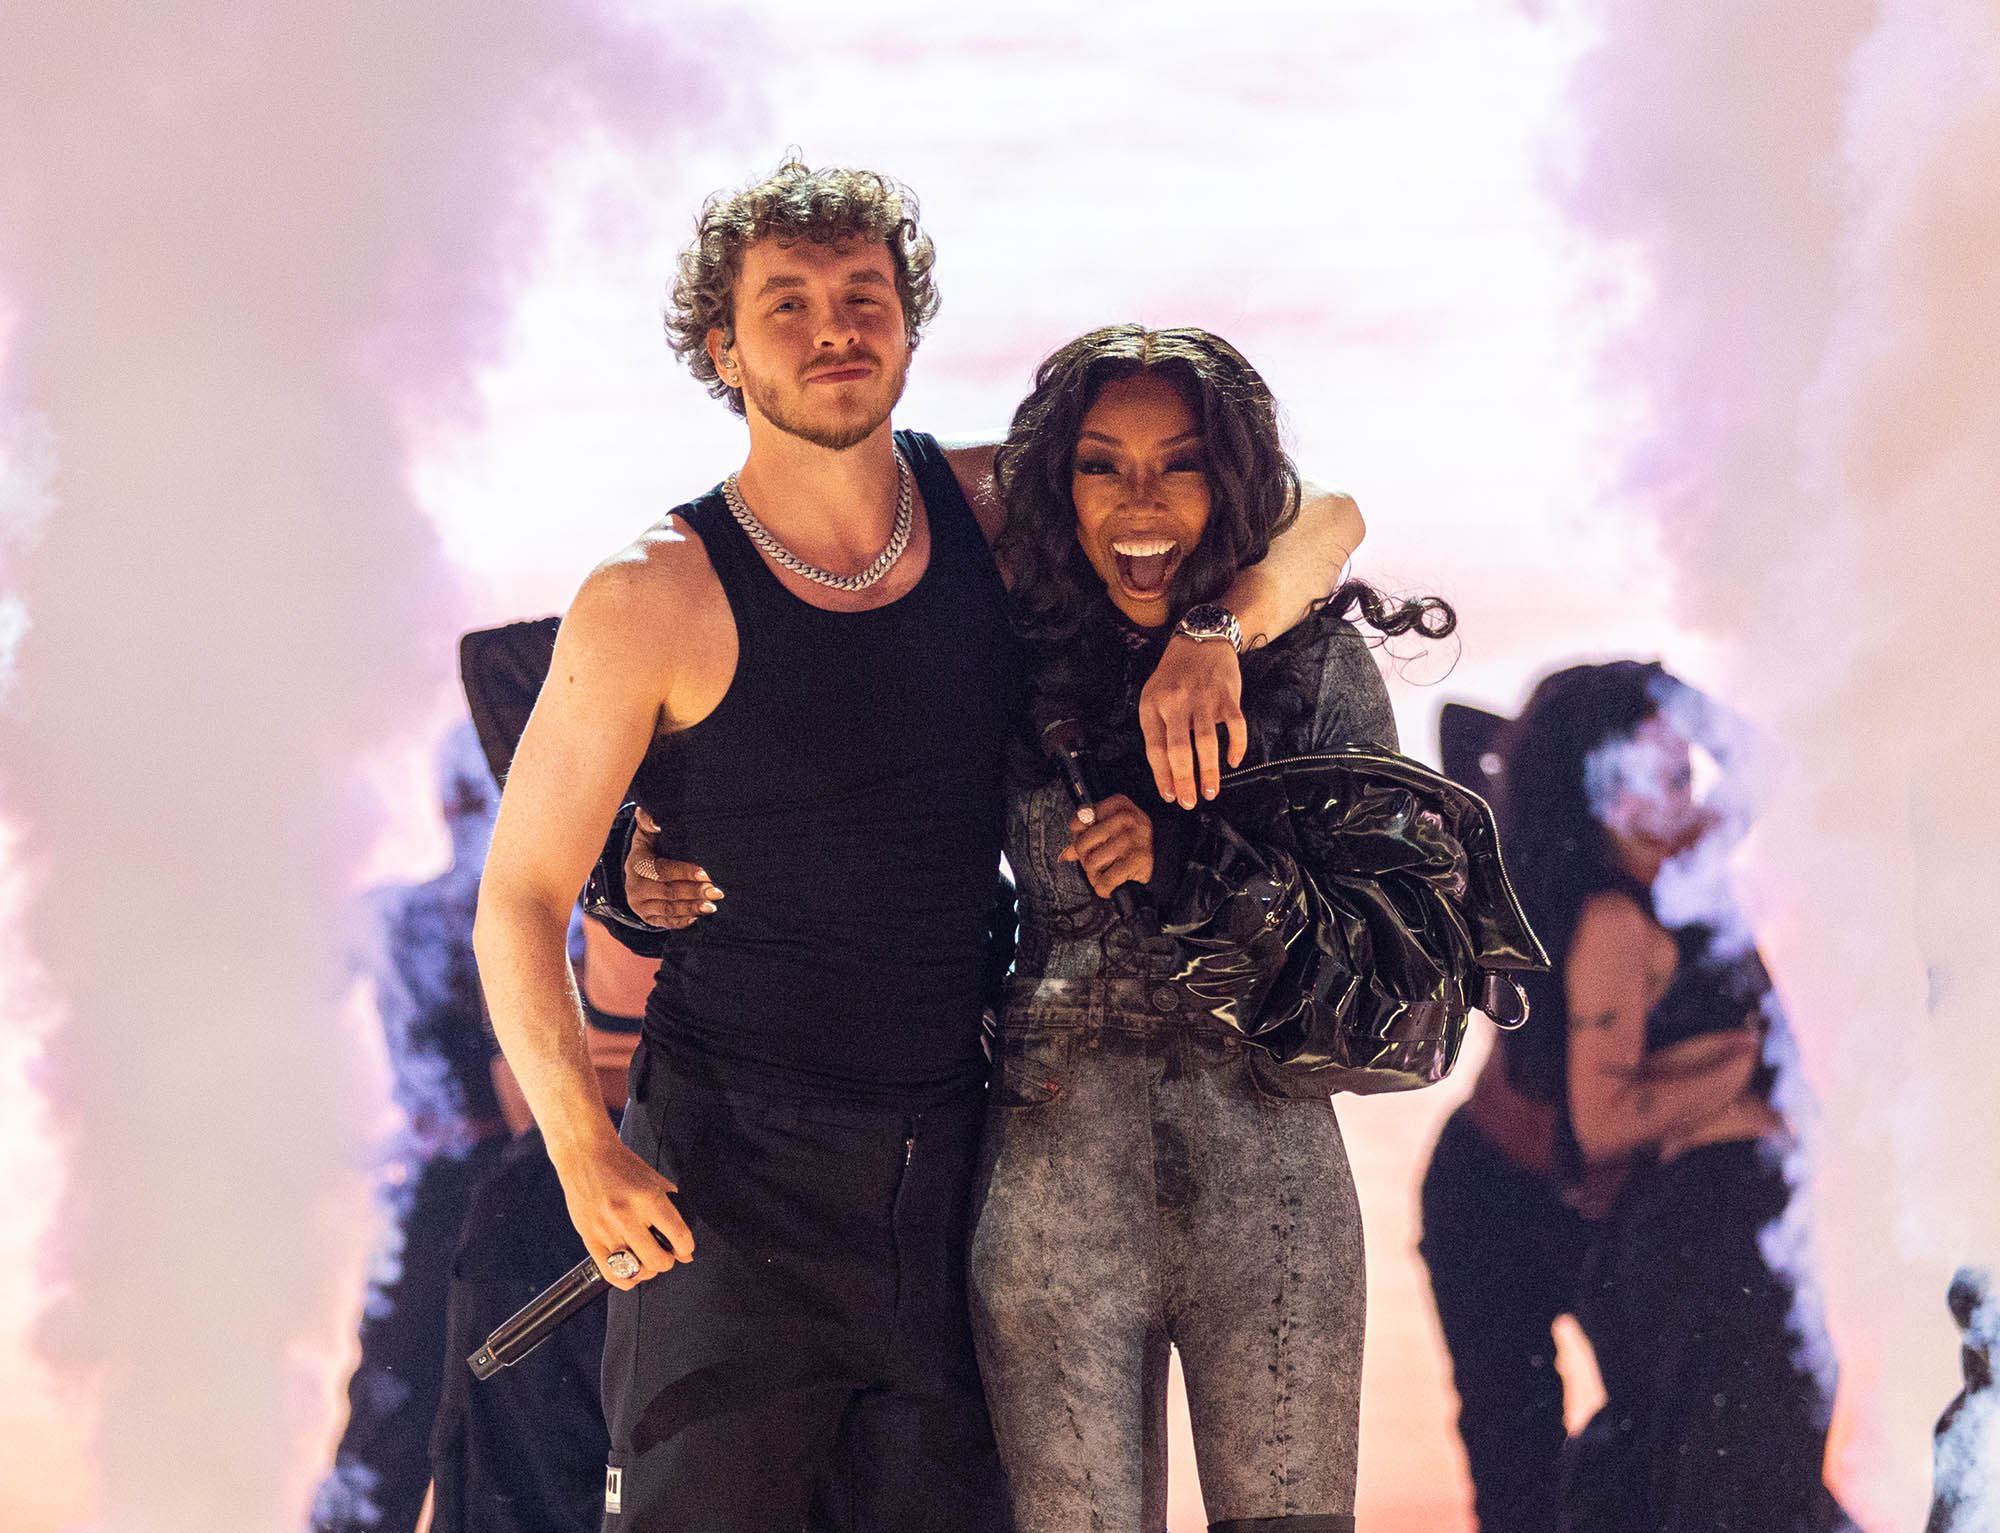 Jack Harlow Performs 'First Class' With Brandy at 2022 BET Awards